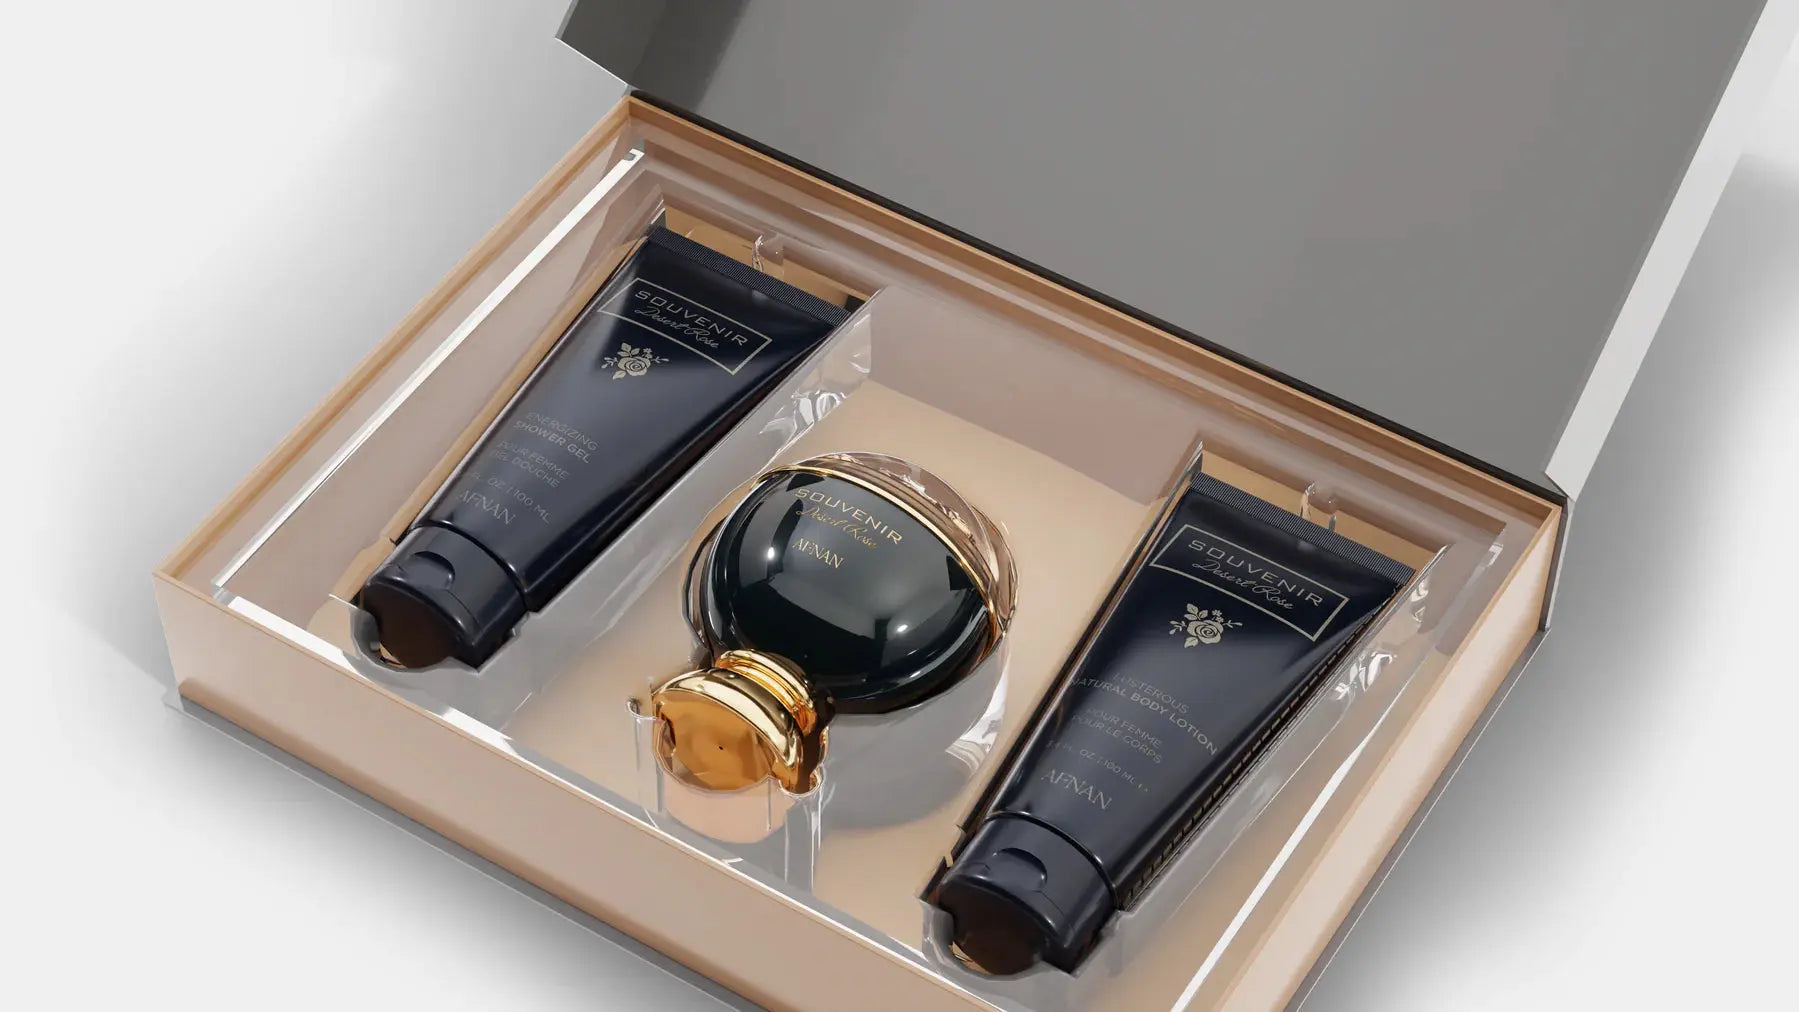 The image shows an elegant gift set by Afnan Perfumes from their "SOUVENIR Desert Rose" collection. The set is displayed in a beige presentation box with a clear lid, revealing its contents. Inside, there is a dark, glossy perfume bottle with a spherical design and a golden cap, positioned centrally. On either side of the perfume bottle are two matching dark tubes.  Both tubes and the perfume bottle feature the "SOUVENIR Desert Rose" branding in elegant gold lettering